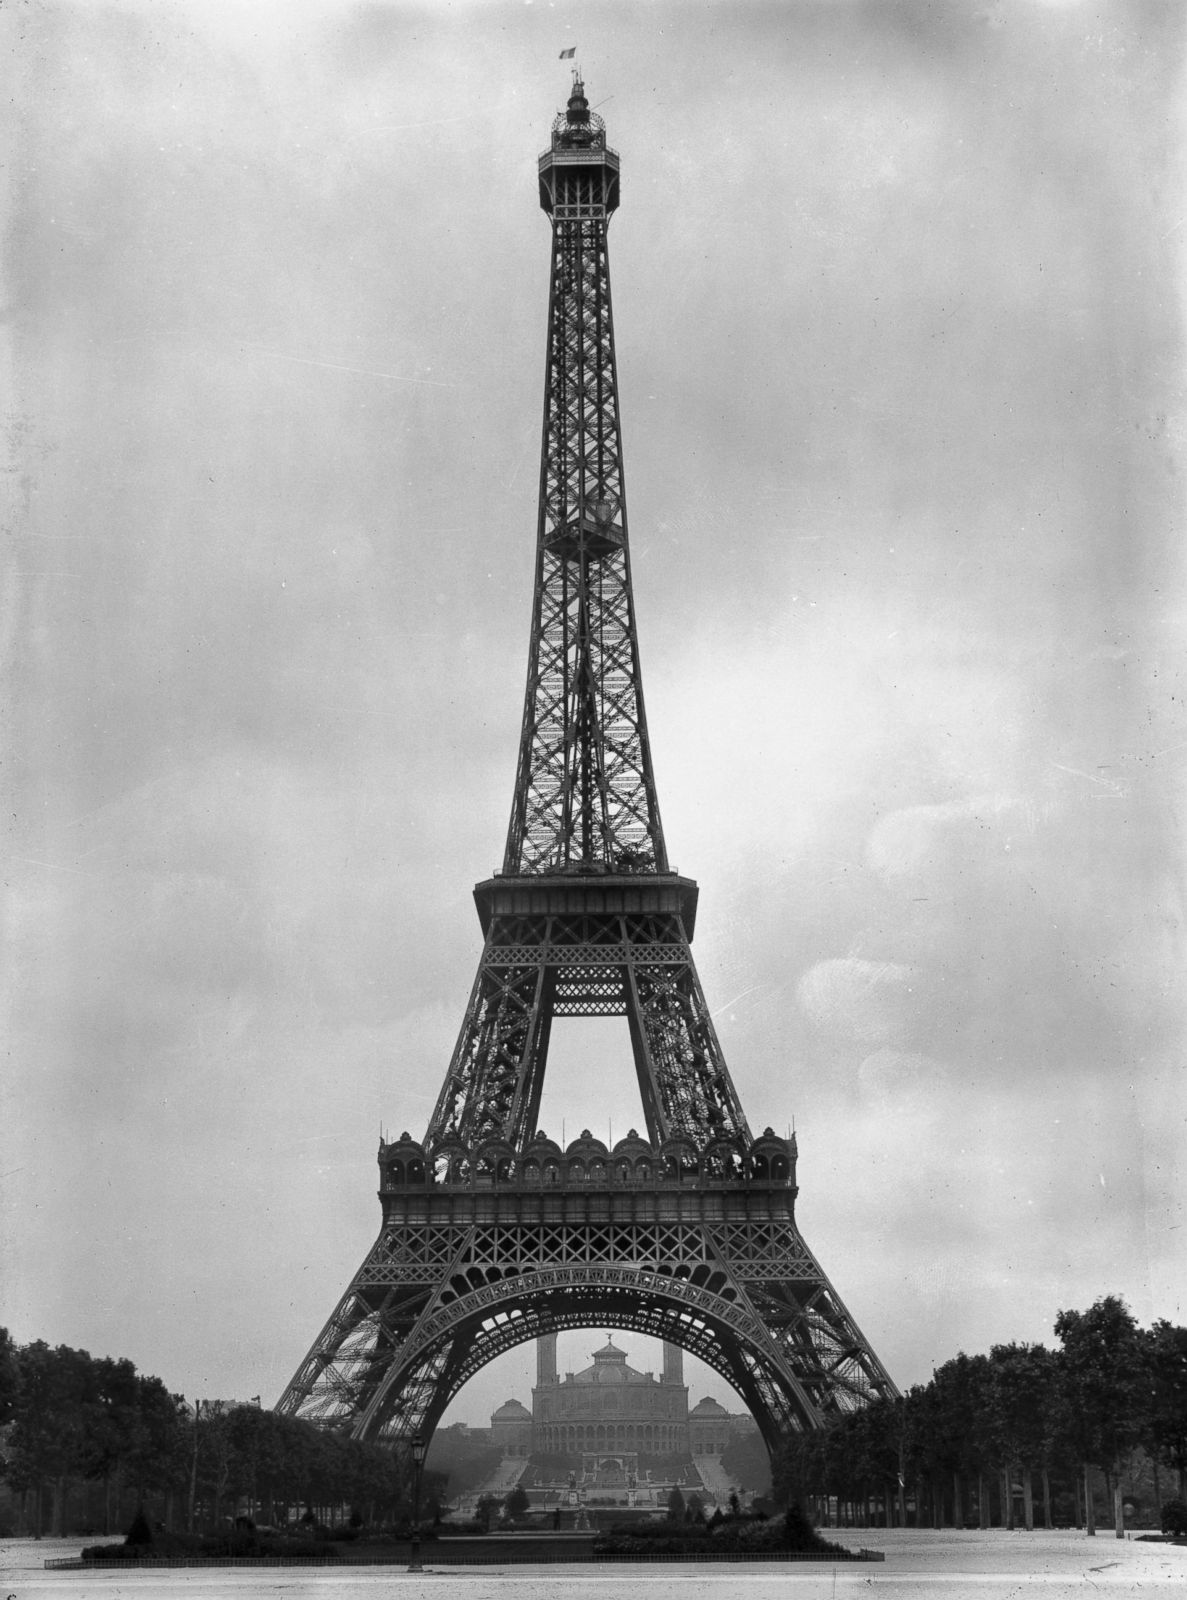 Eiffel Tower's Construction From Start to Finish Photos - ABC News